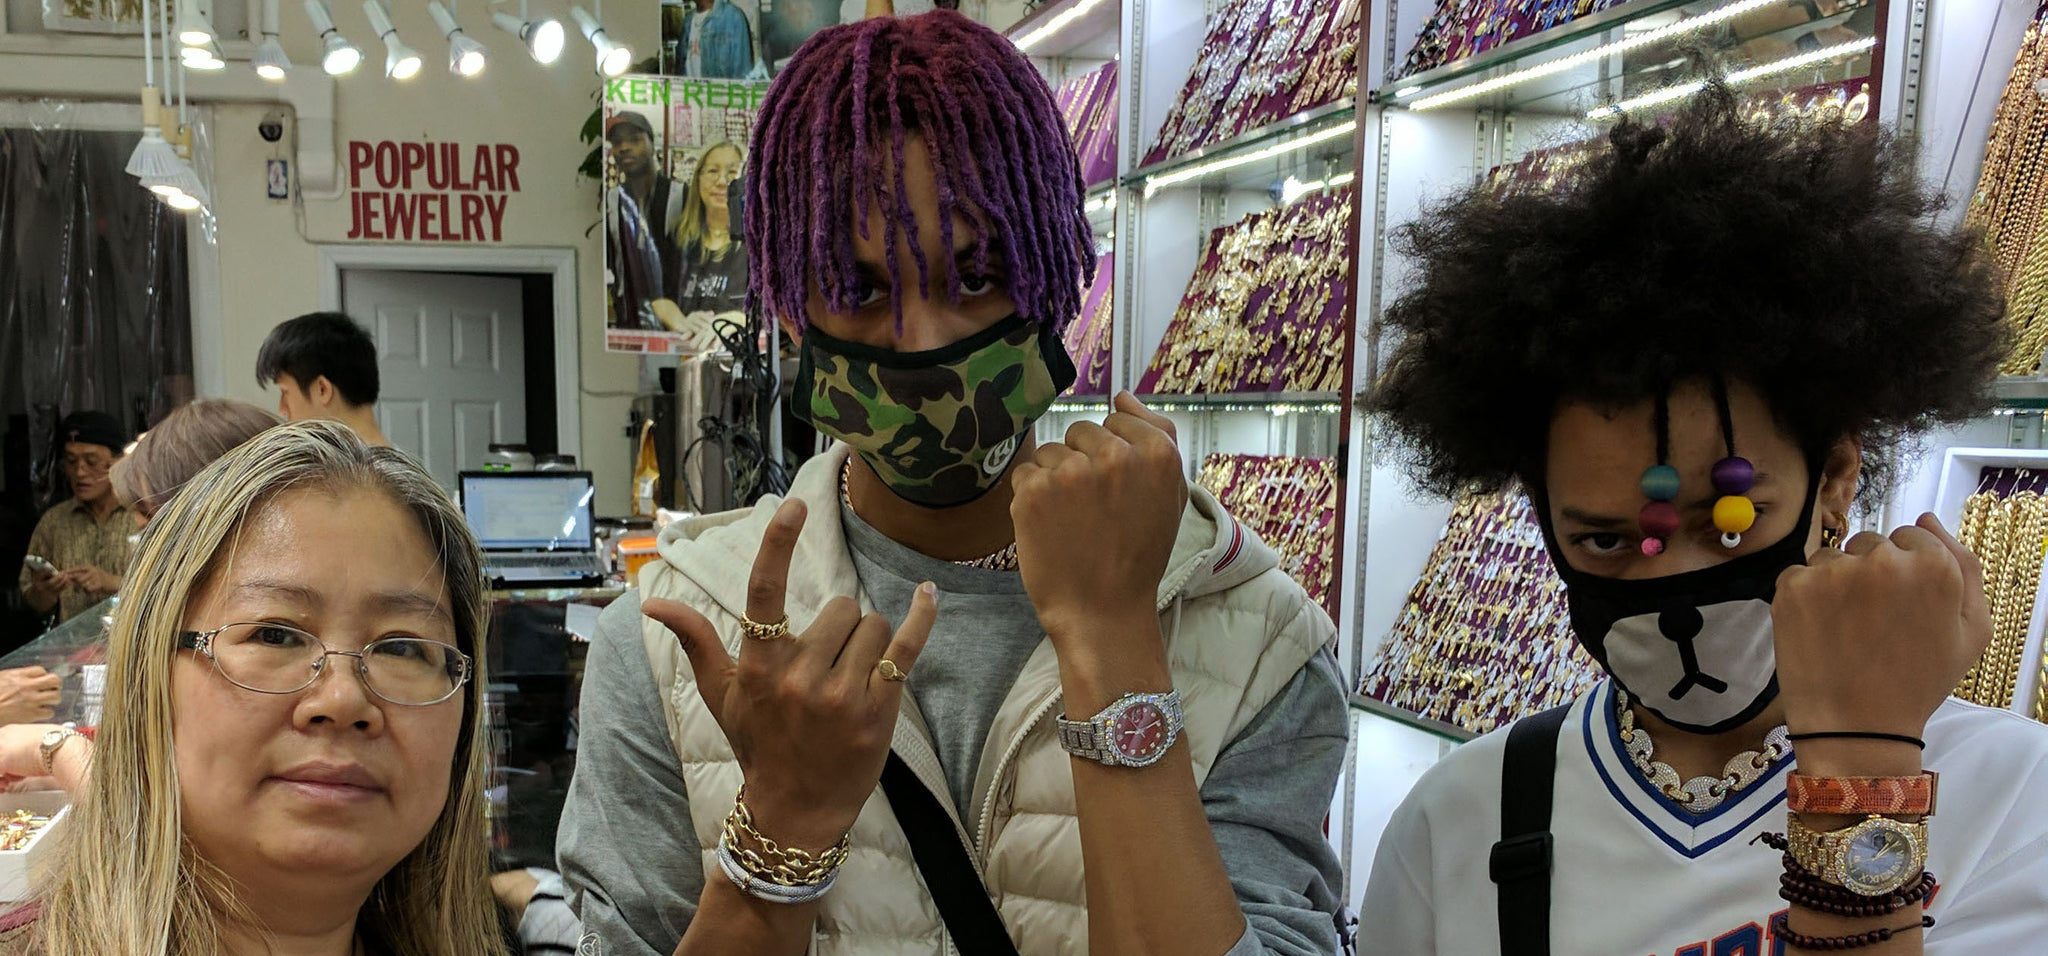 Ayleo and Mateo Bowles (born October 30, 1996 (Ayo) and August 29, 1999 (Teo)), commonly known as Ayo & Teo are a duo of American dancers.[2] They have appeared in music videos for Usher's "No Limit" and Chris Brown's "Party". Their song "Rolex" peaked at number 20 on the US Billboard Hot 100.